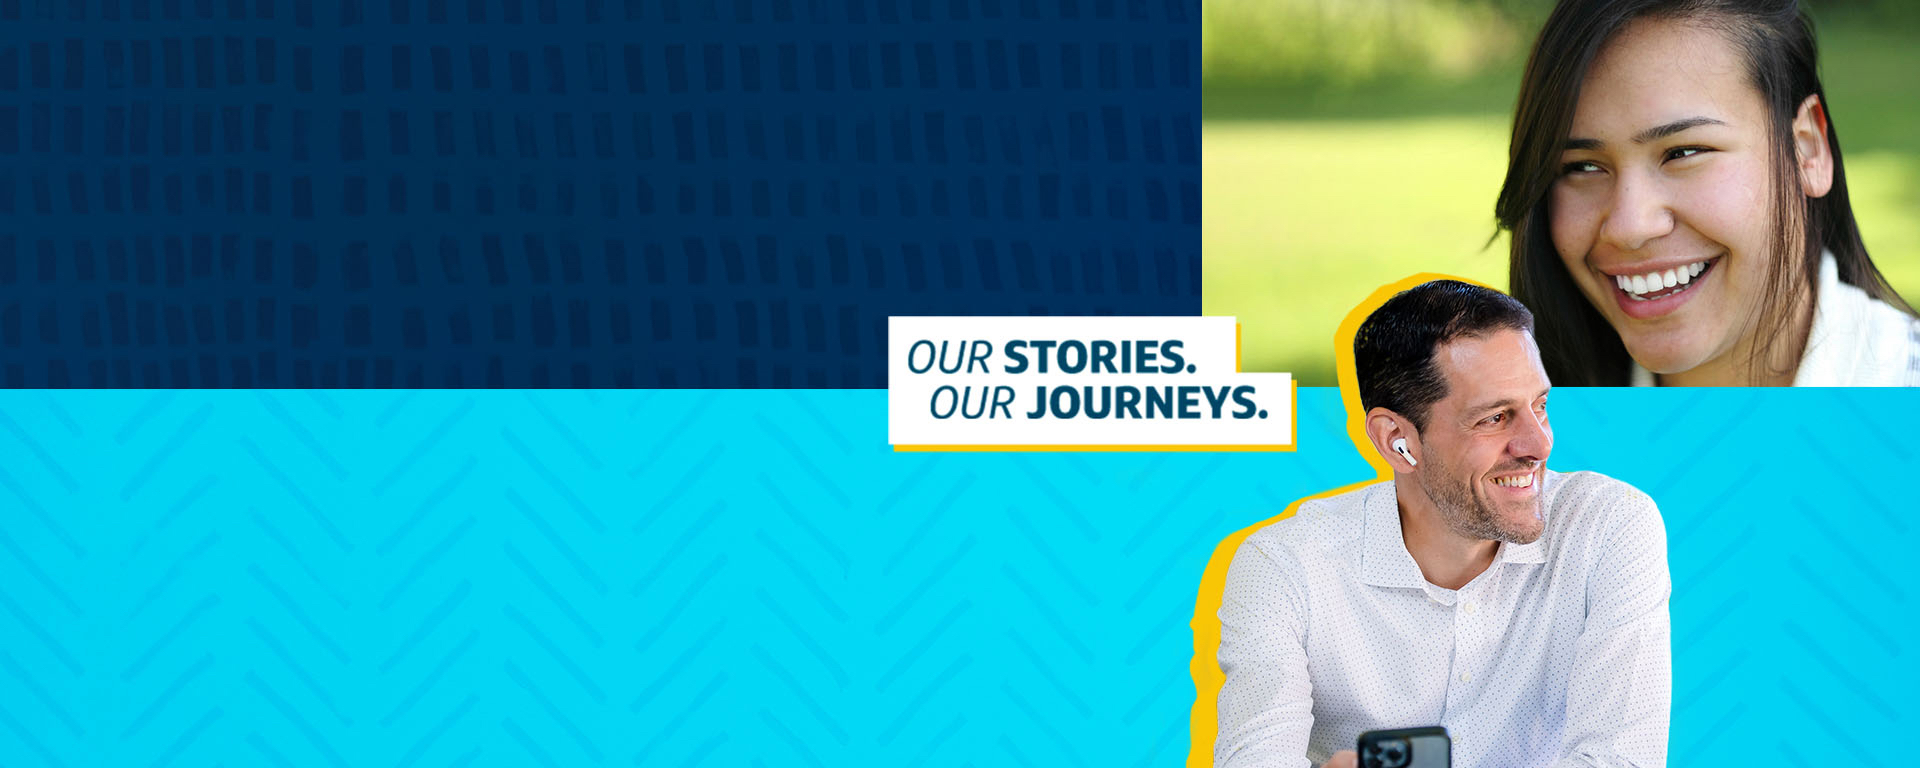 Two images of Capital One associates smiling, with multi-colored blue background and wording that says "Our Stories, Our Journeys"